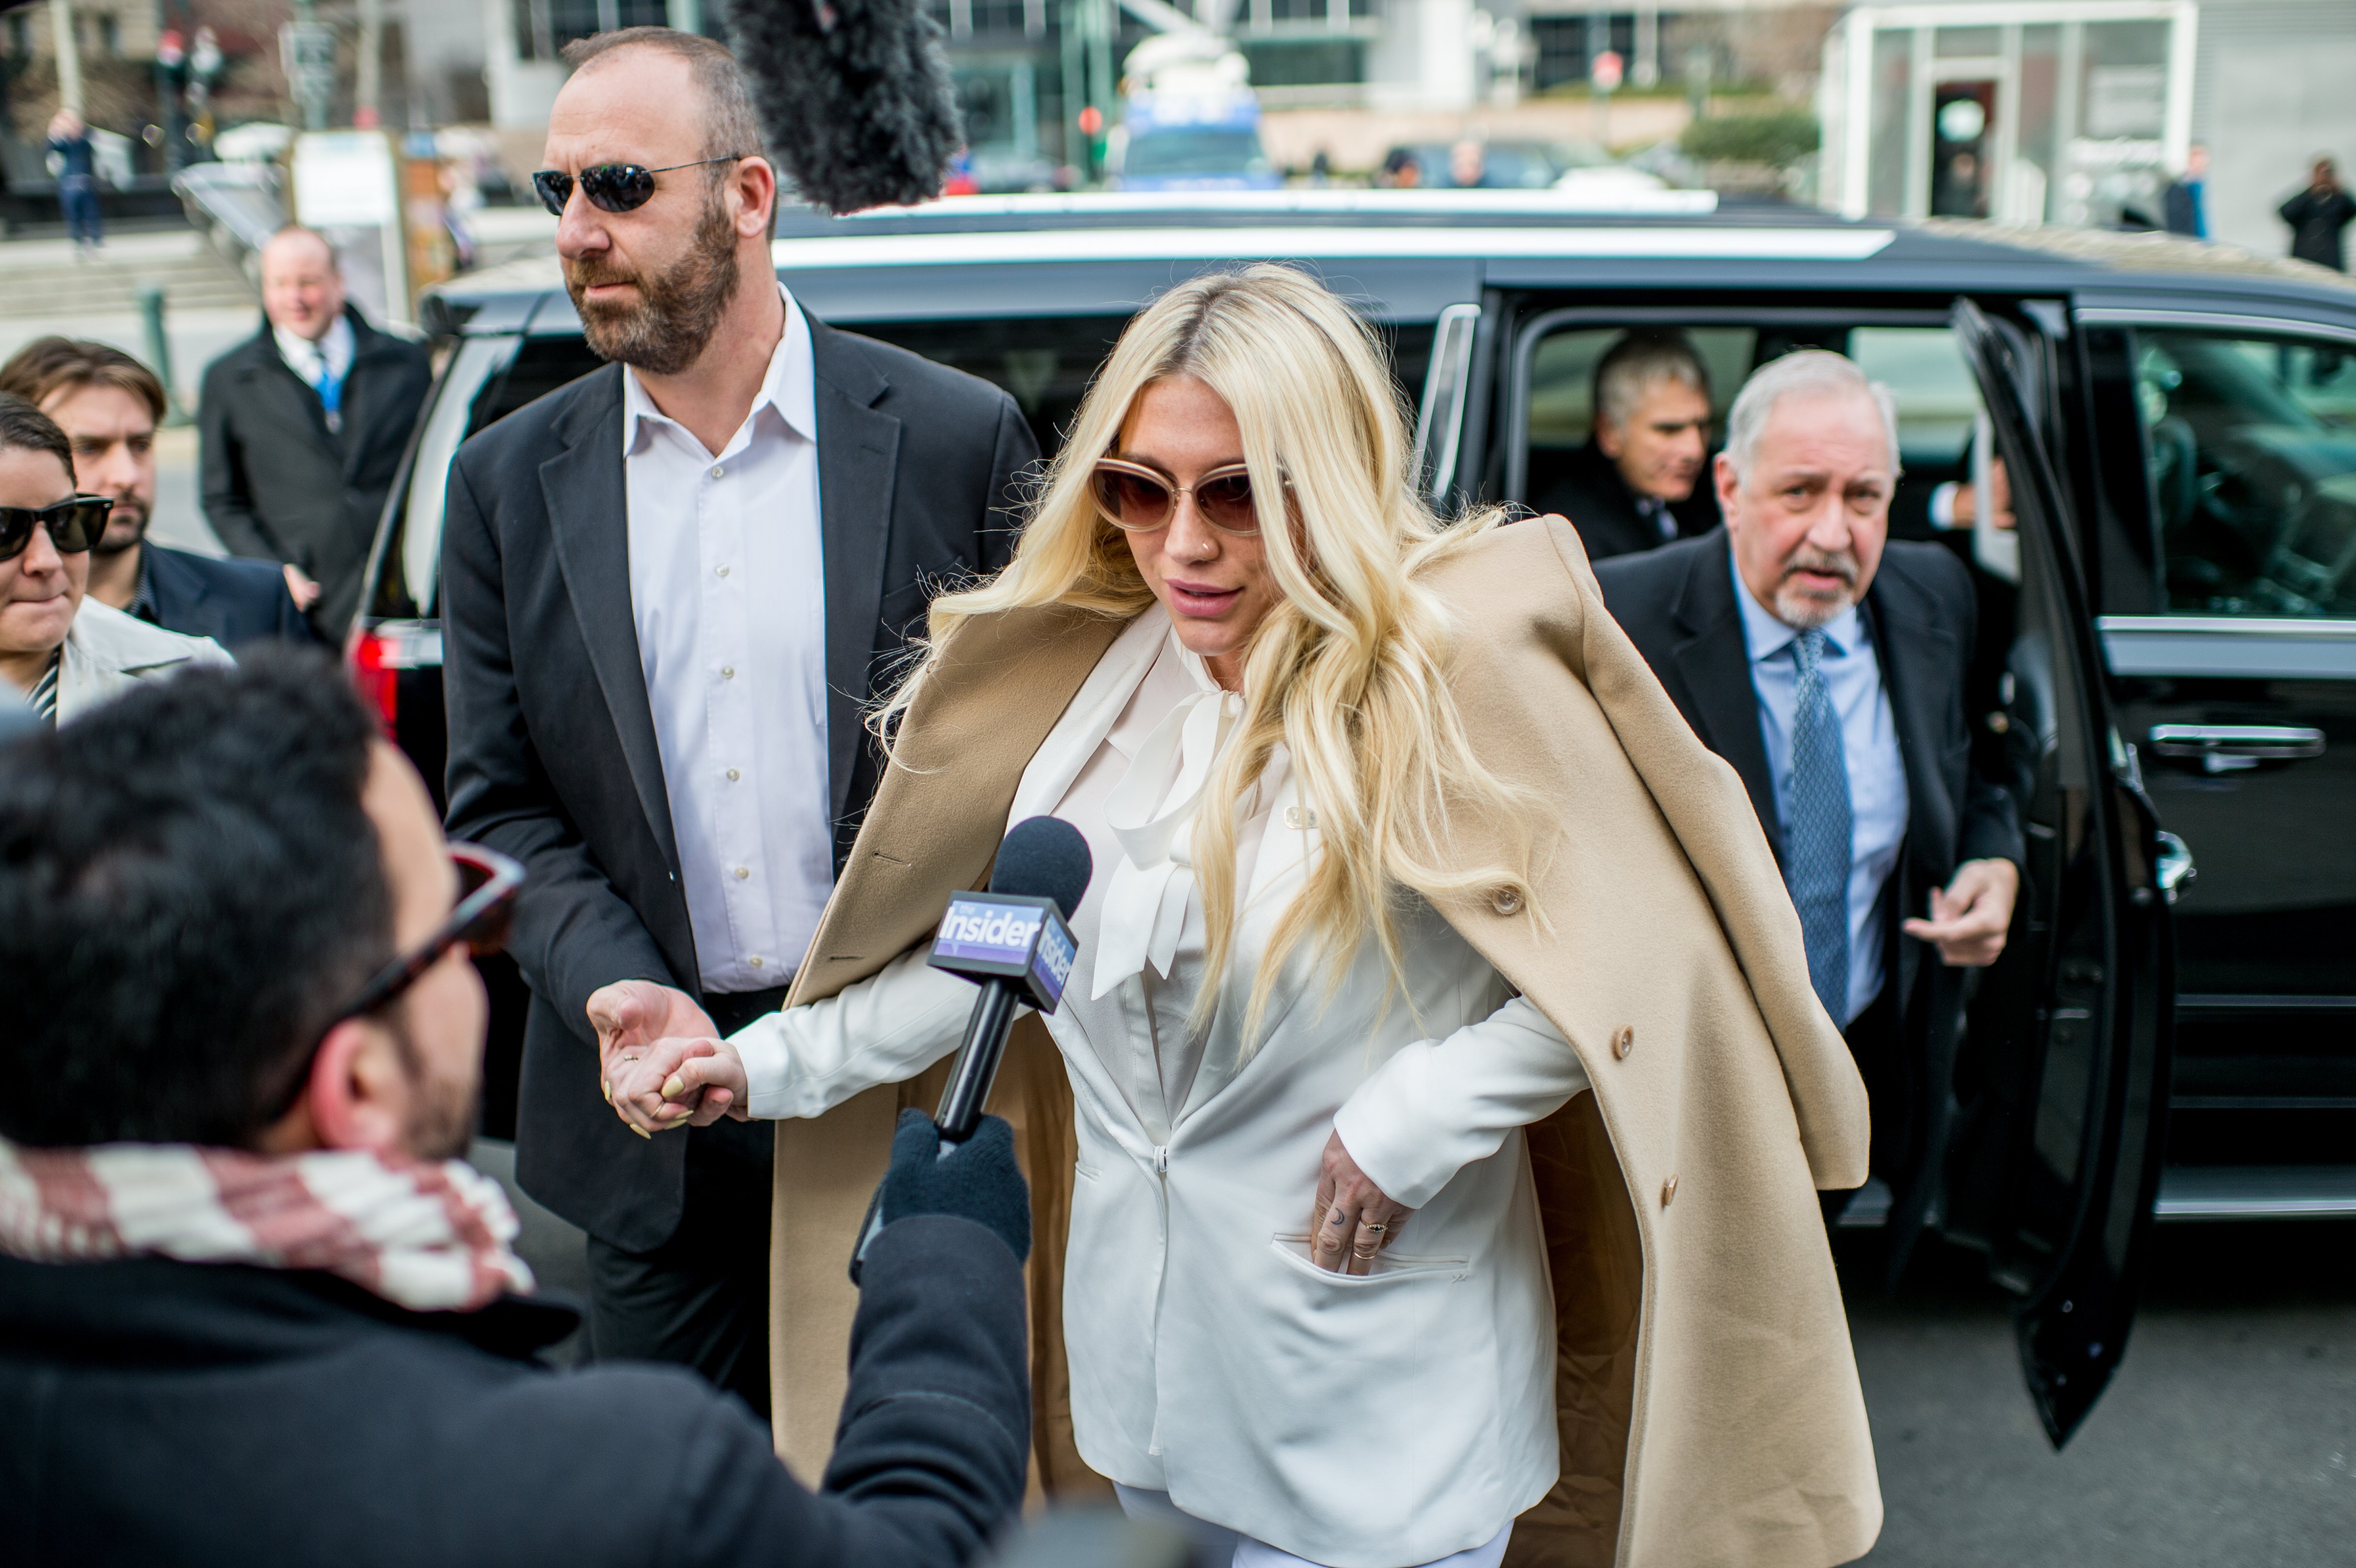 Kesha makes a court appearance as fans protest Sony Music Entertainment outside New York State Supreme Court on February 19, 2016 in New York City. (Roy Rochlin&mdash;Getty Images)